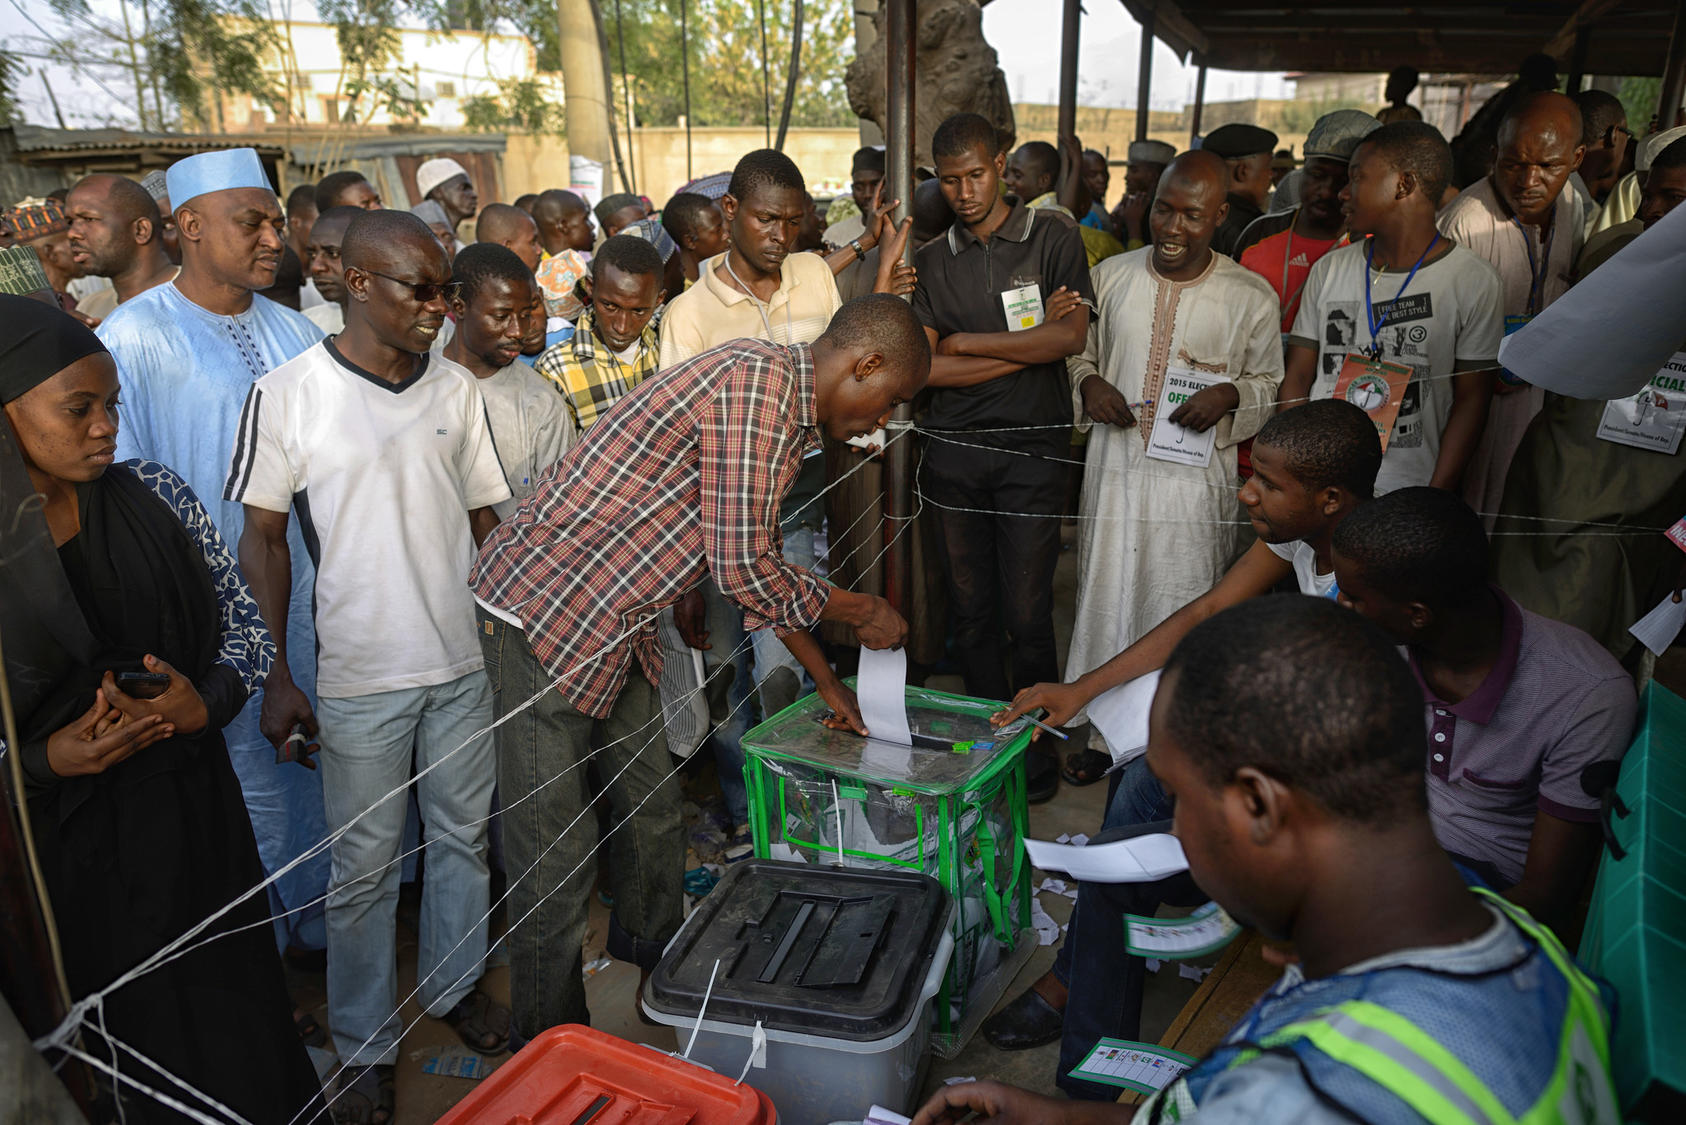 A man casts his ballot at a polling station in Kano, Nigeria, March 28, 2015. Many Nigerians fear a clash along religious, ethnic, and sectional lines regardless of the result of the presidential race between incumbent Goodluck Jonathan, a Christian from the south, and Muhammadu Buhari, a former military ruler and Muslim northerner. 